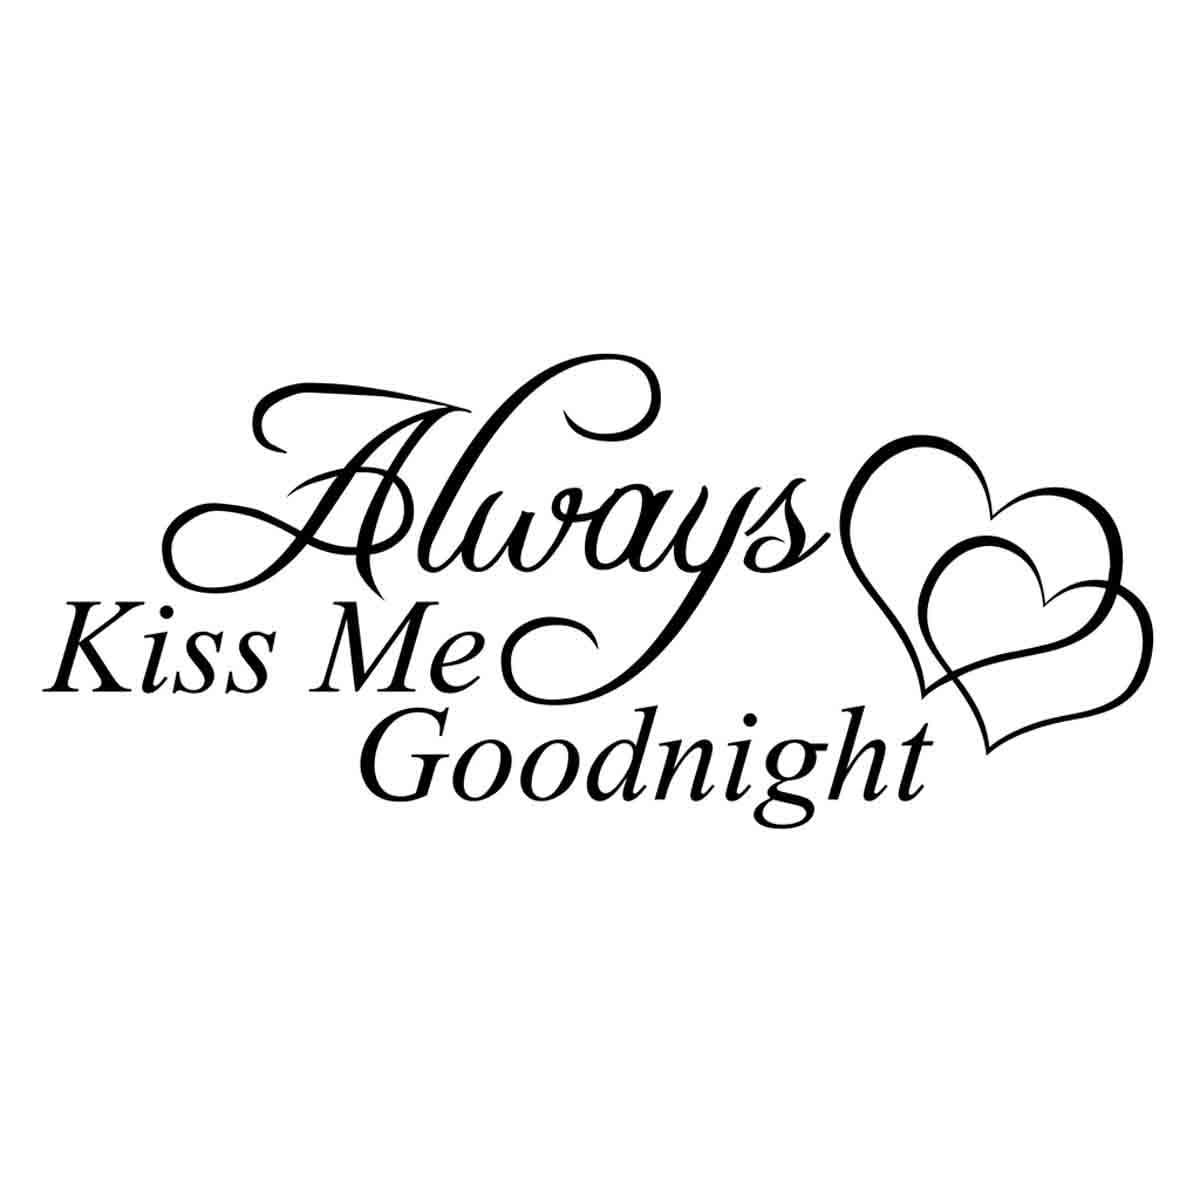 Always Kiss Me Goodnight Wall Decal Quote Vinyl Word Decor Home Sticker